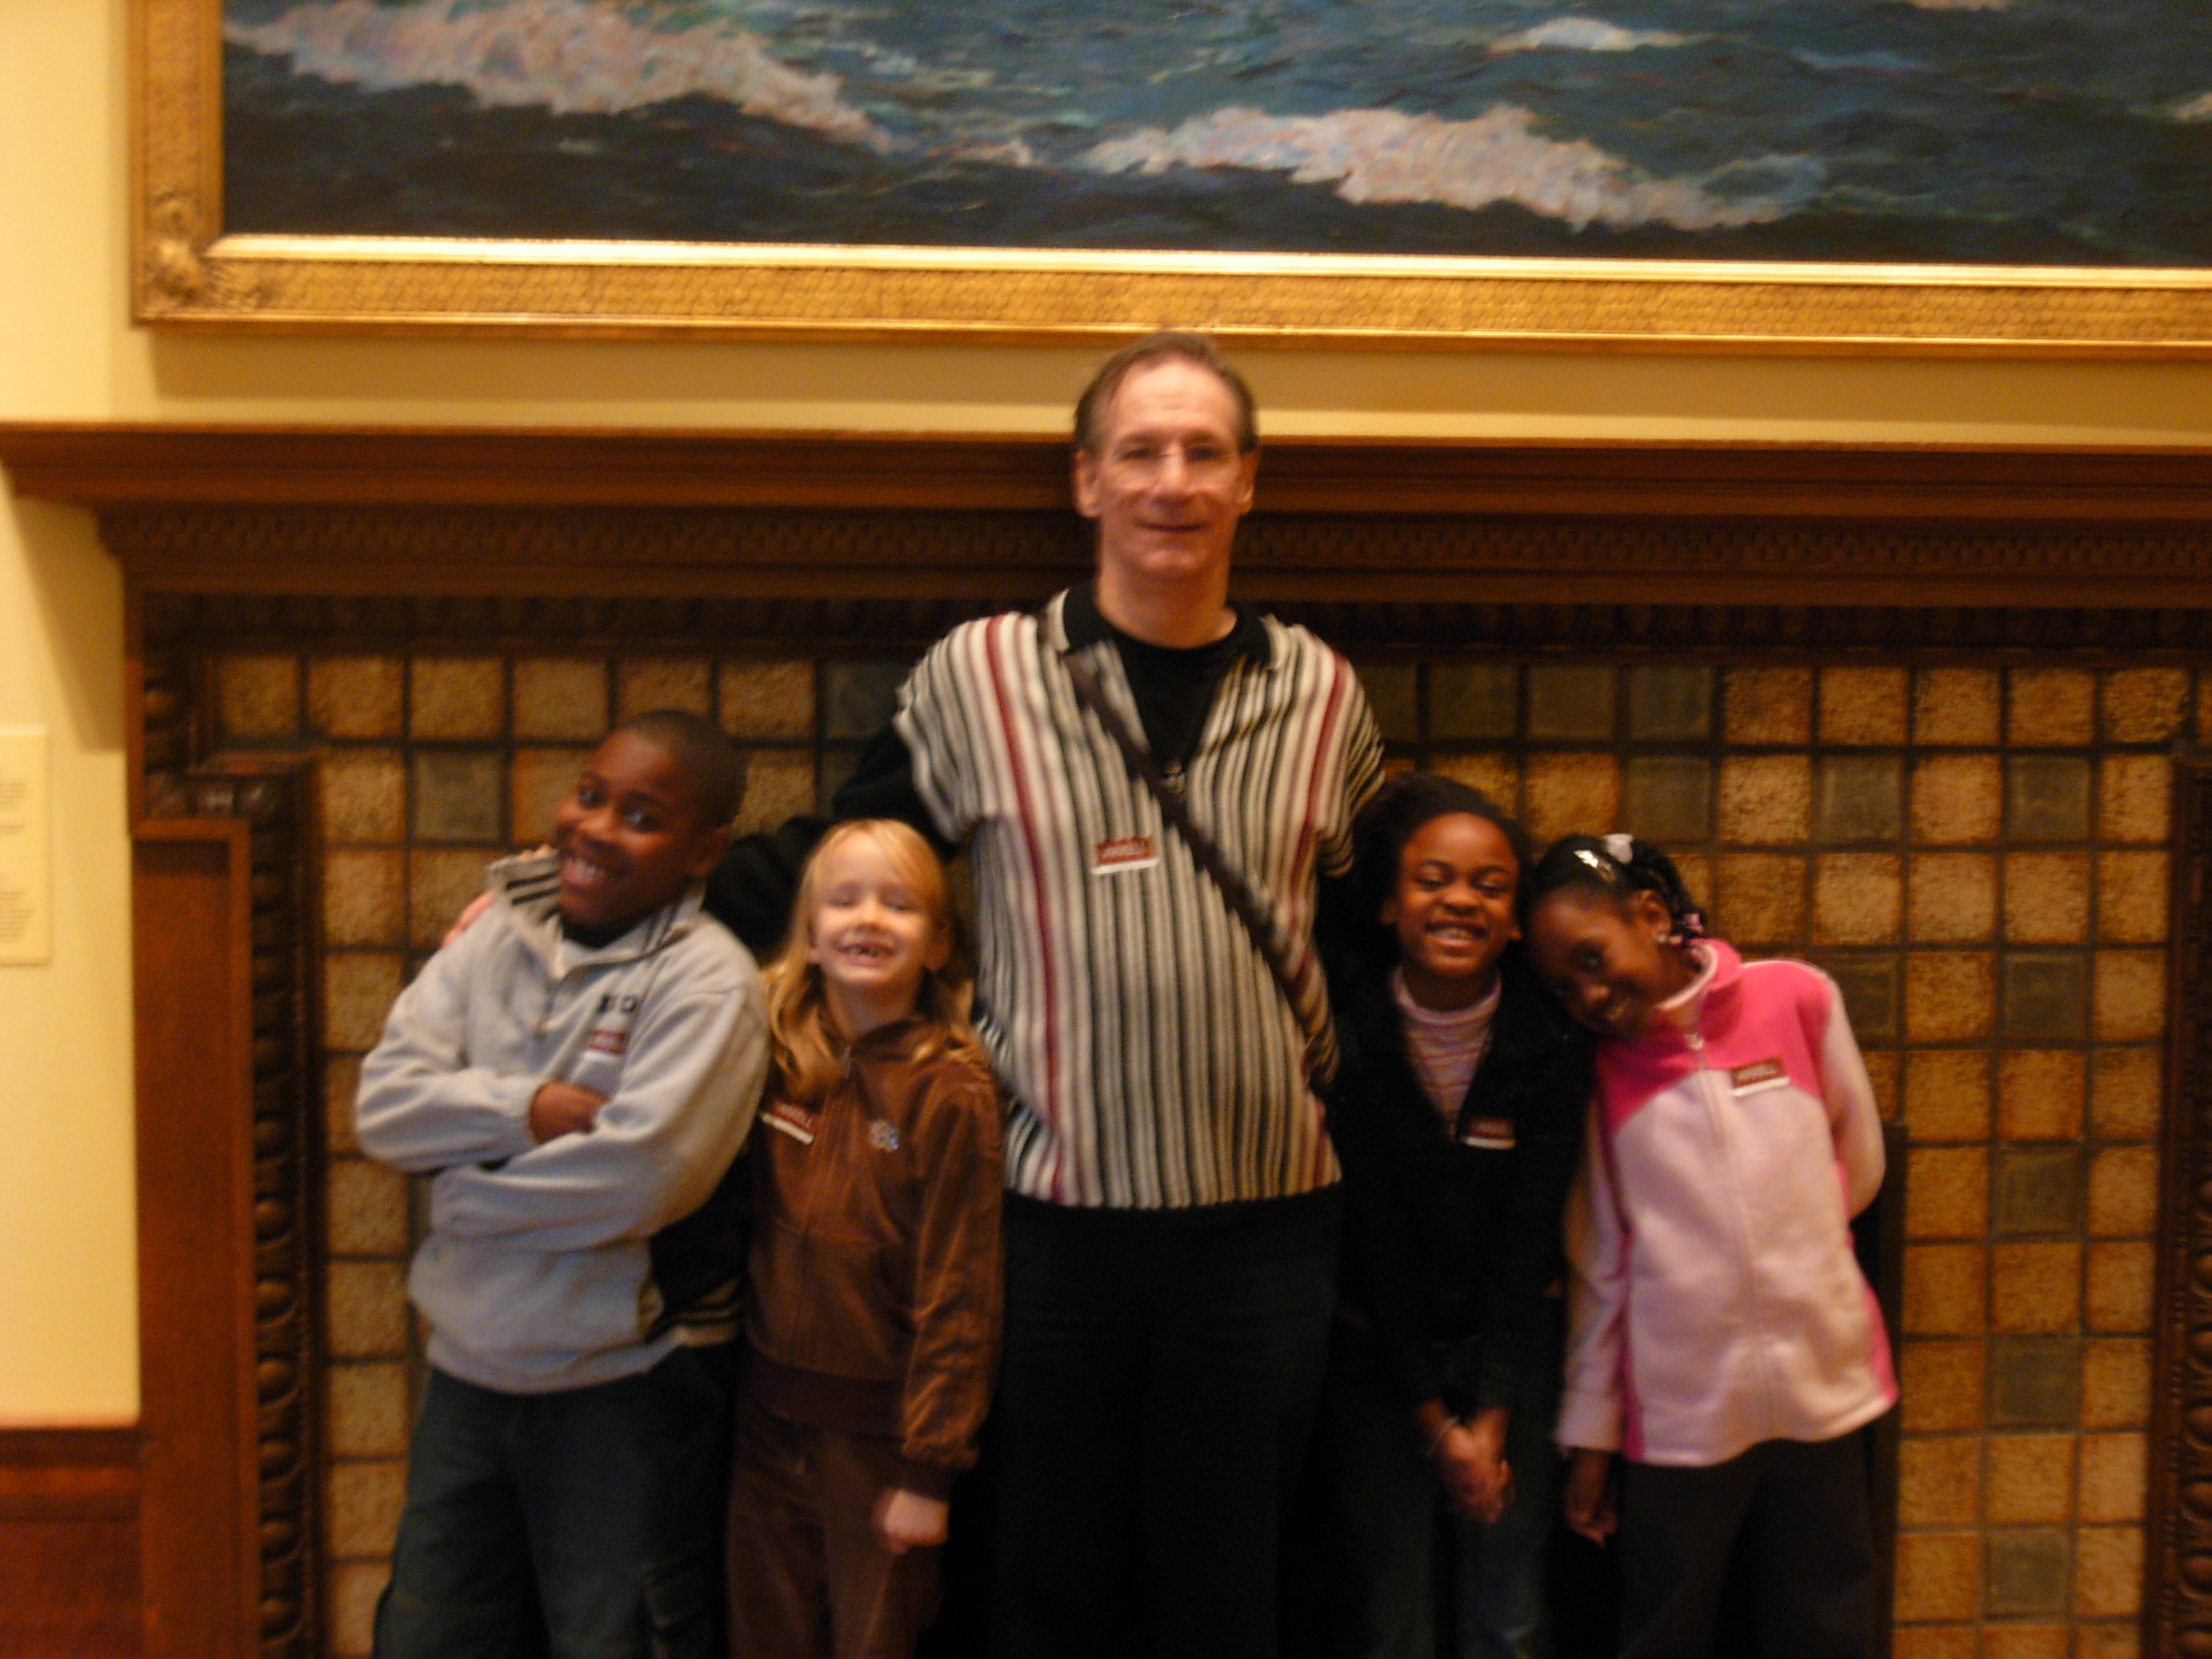 Ken Ludden with Fonteyn Academy students during museum field trip